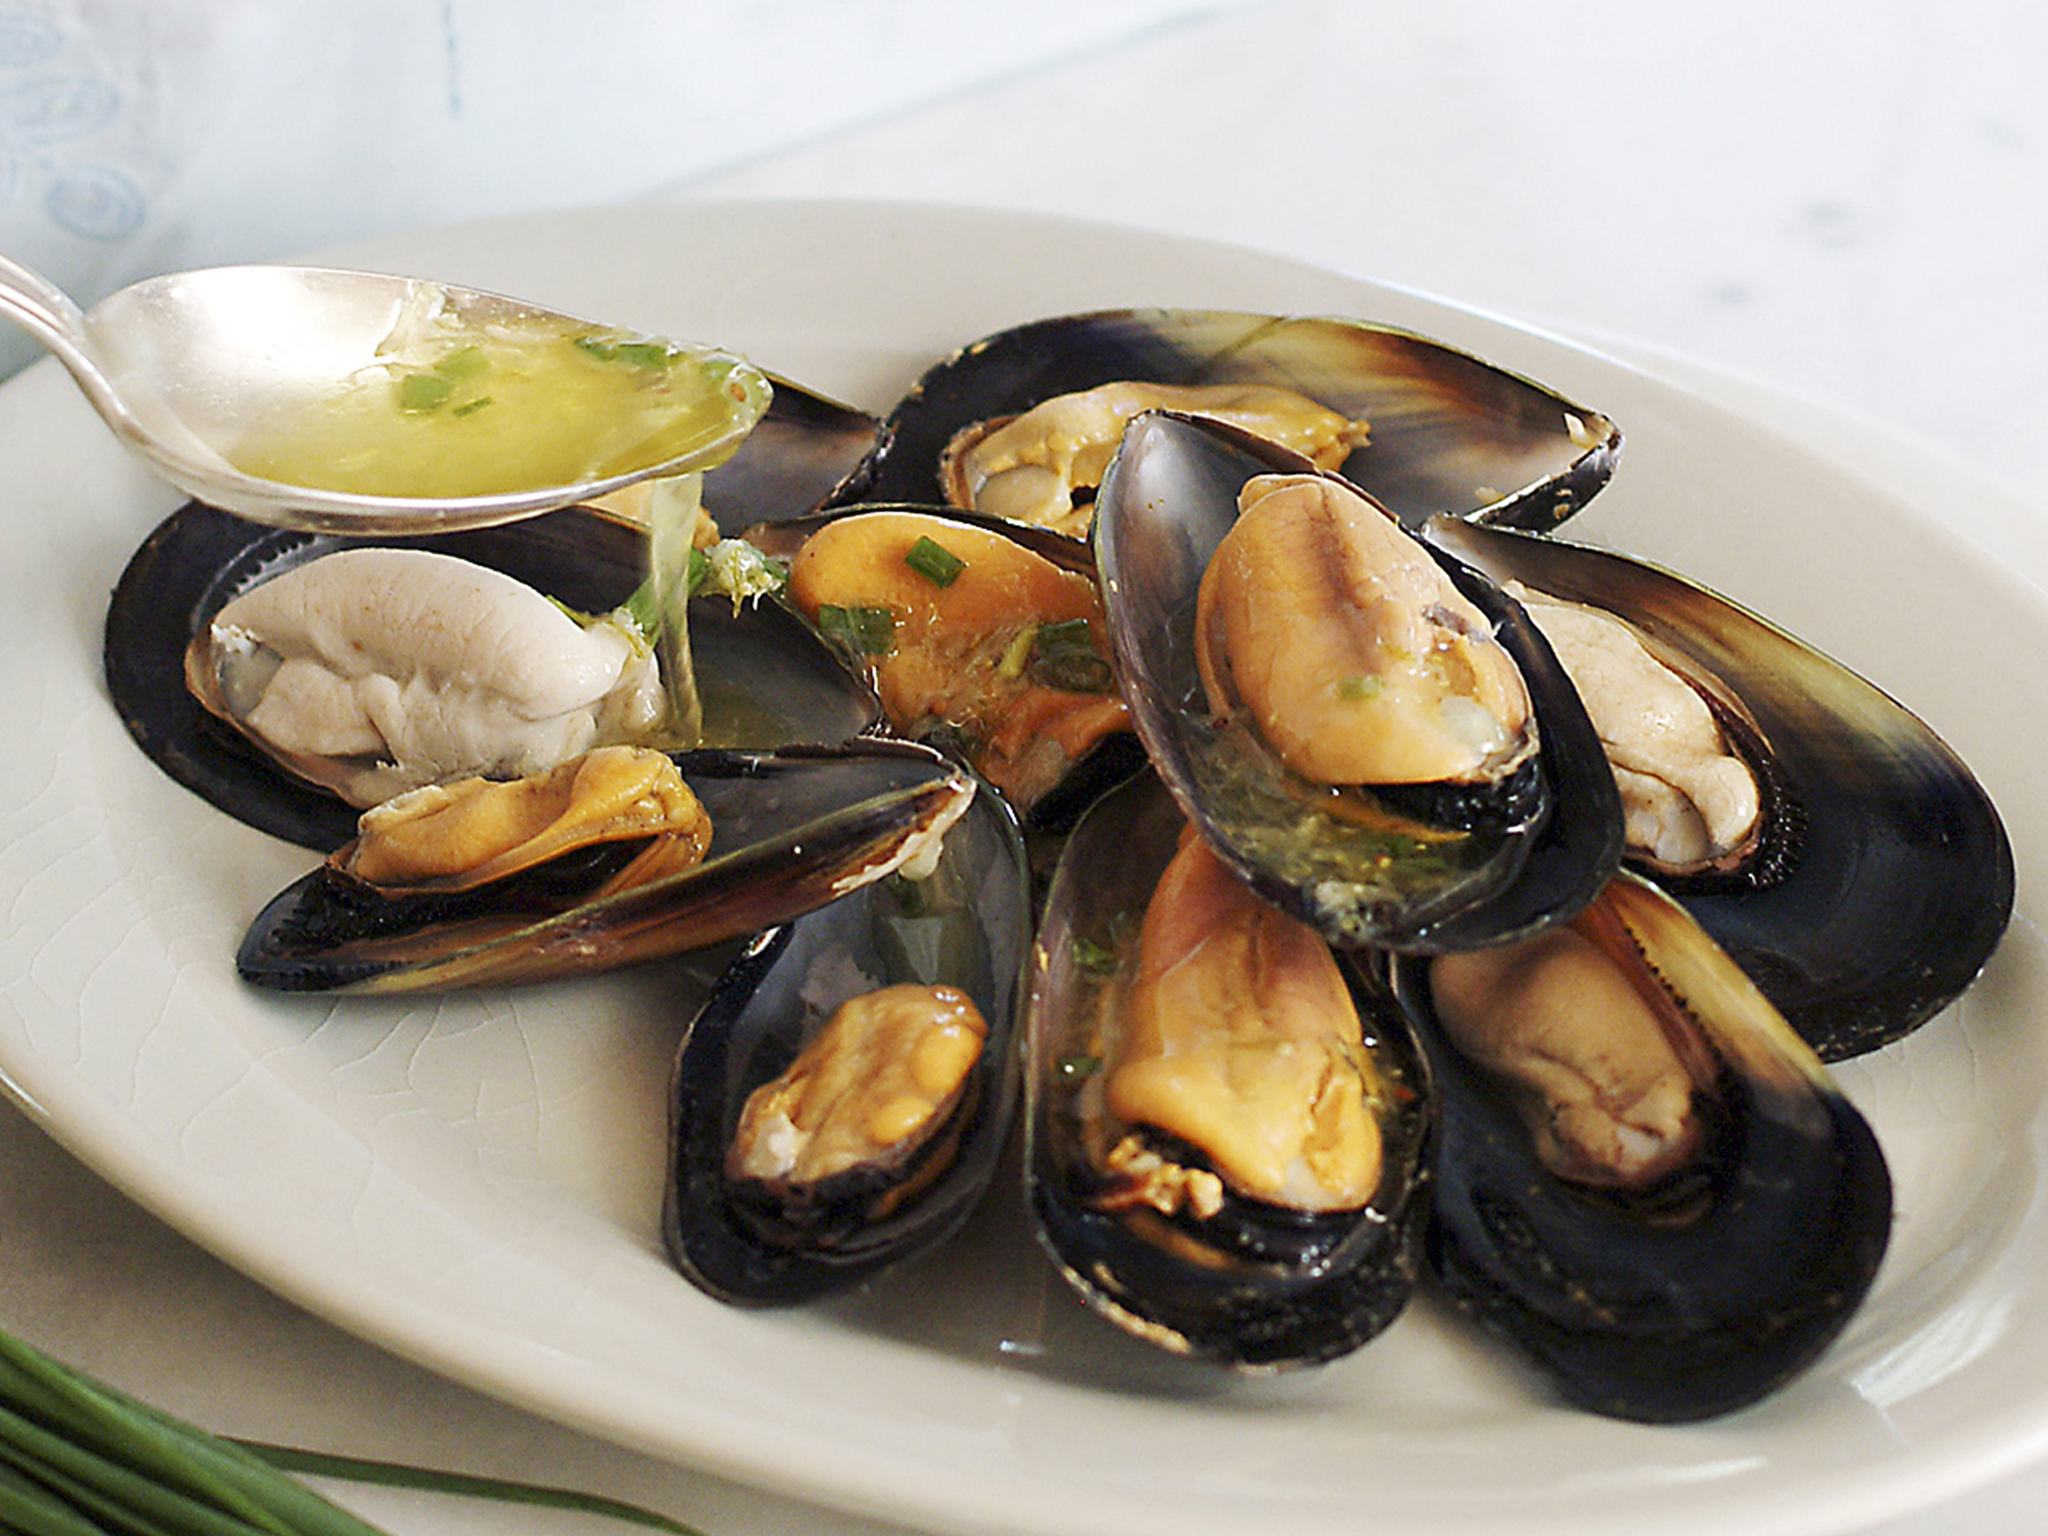 Flavours of Spain - Marinated Mussels